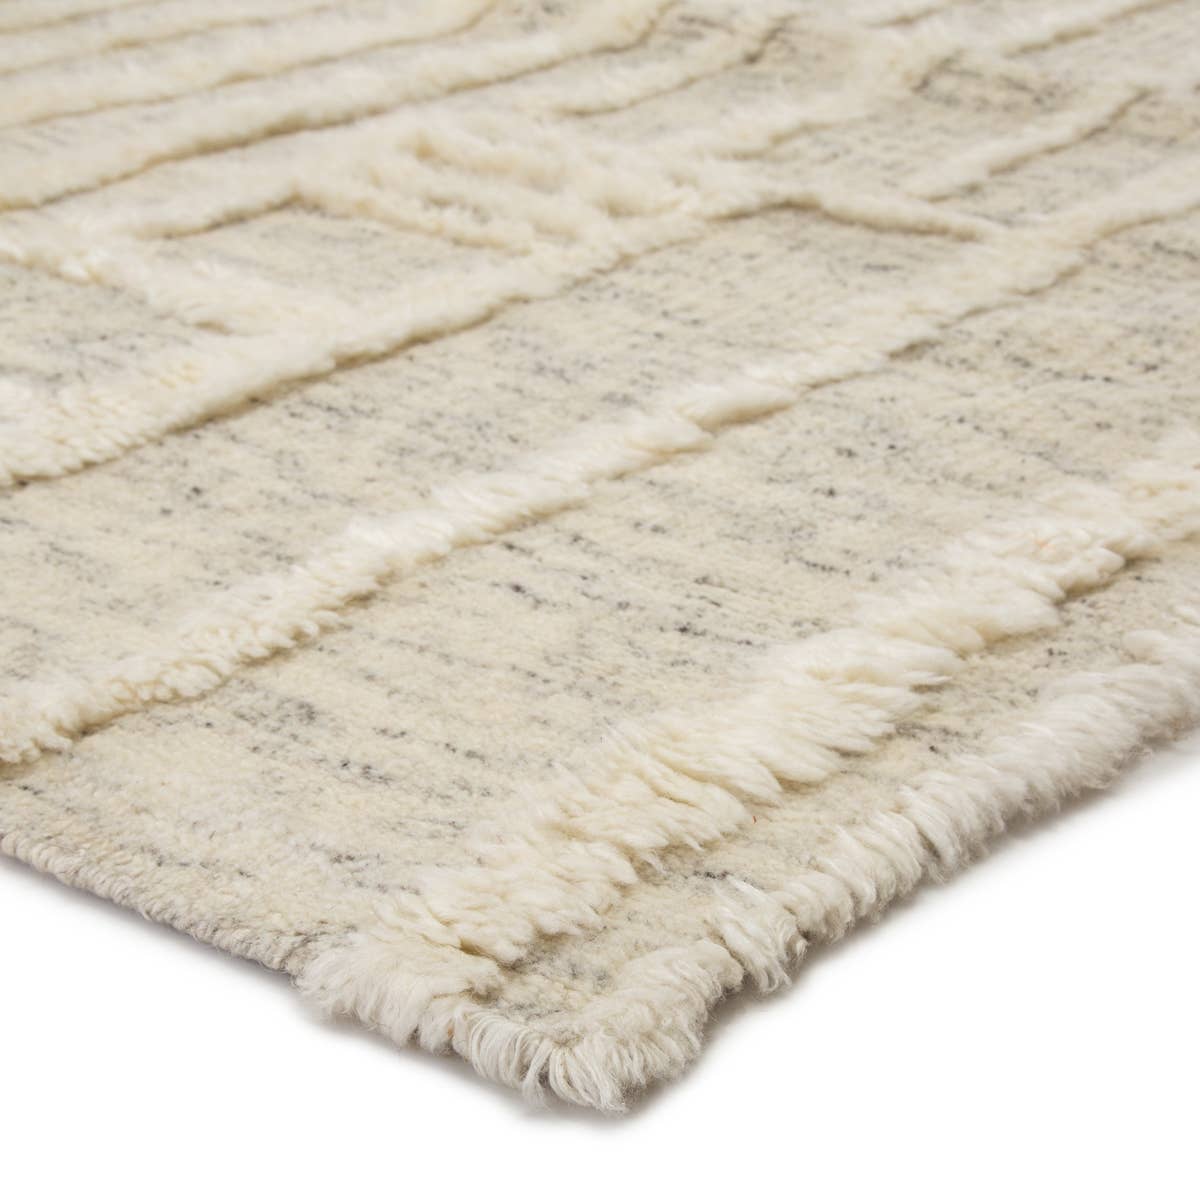 The Tala Casamir Area Rug by Jaipur Living, or TAL08, is a hand-knotted rug that brings a new sense of luxury and comfort. The Casamir area rug showcases a crosshatched lattice design in an inviting cream haue with earthy toned flecks of brown wool fibers. Perfect for the master bedroom, den, or other low traffic area.